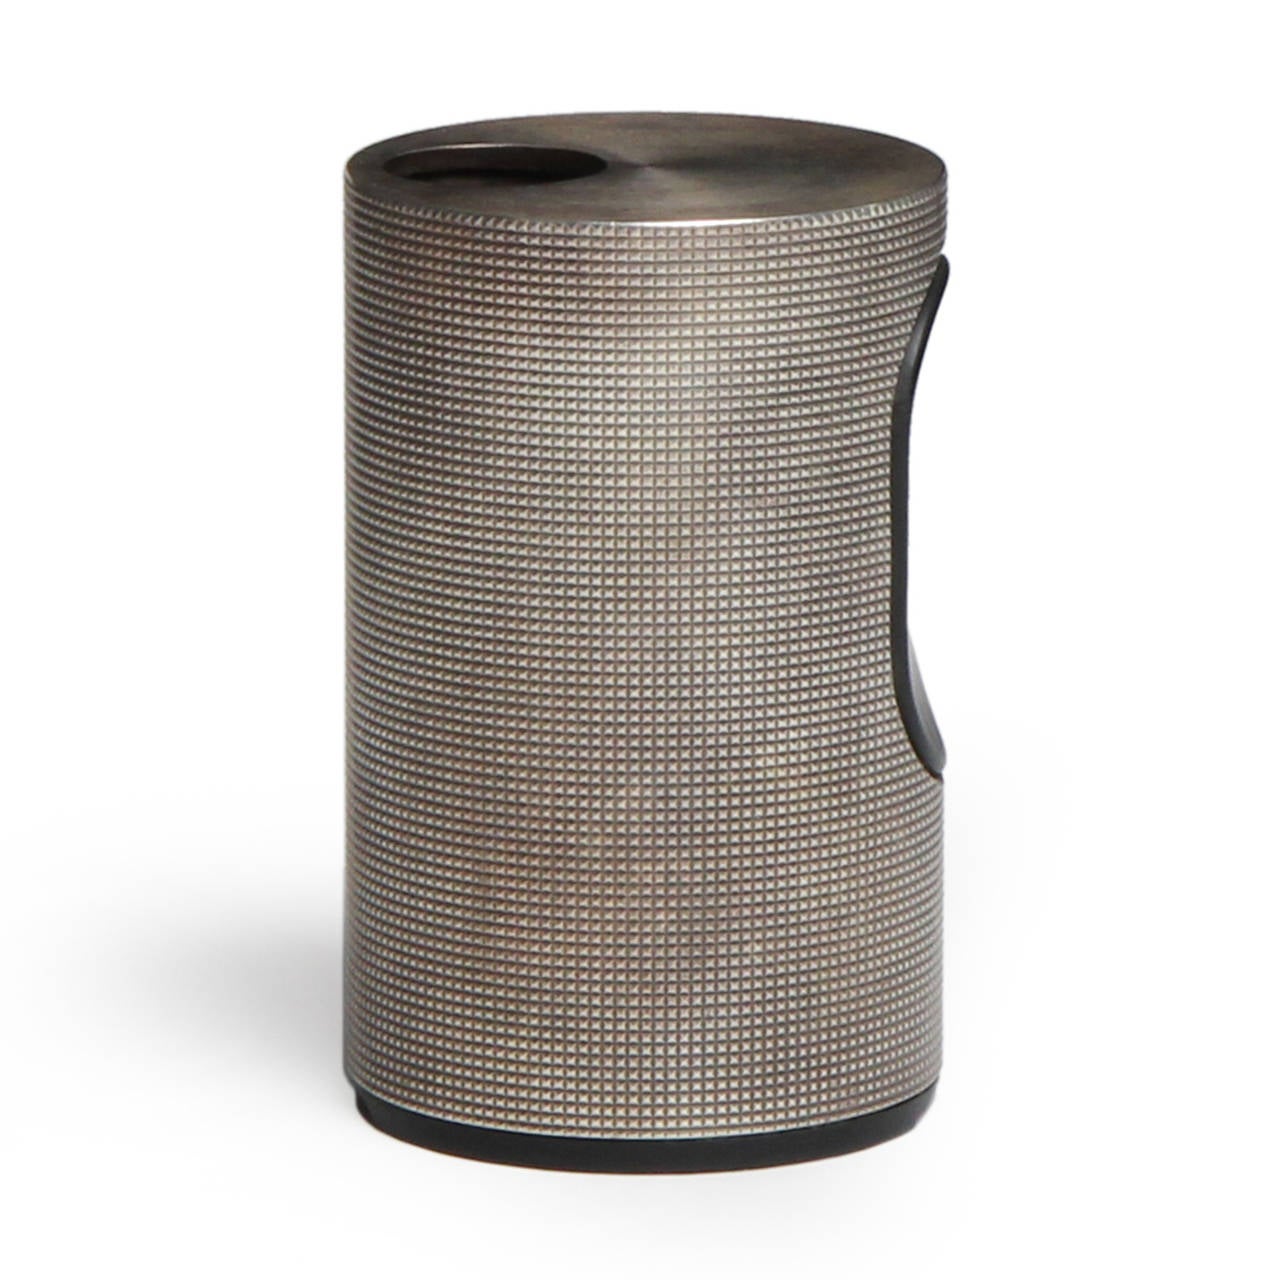 A refined and geometric steel table lighter having a precise cylindrical form with incised cross hatching.